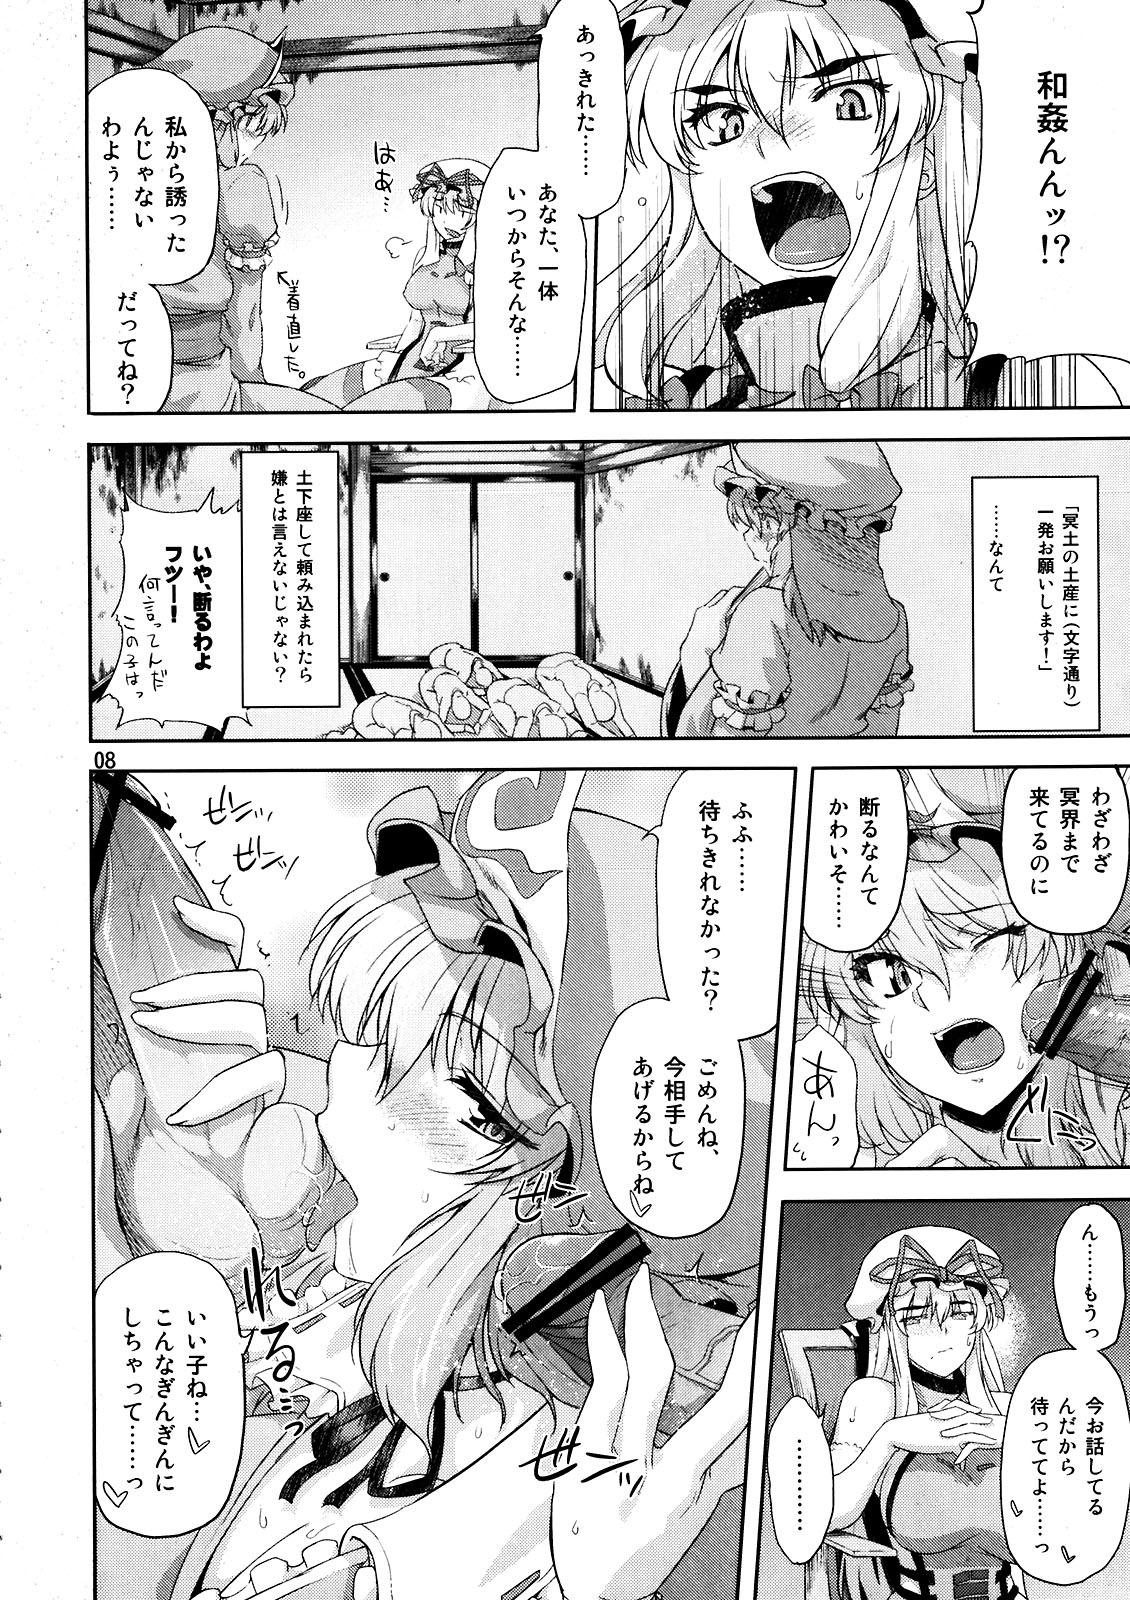 Beurette Toshimaen 0 - Touhou project Big Dick - Page 8